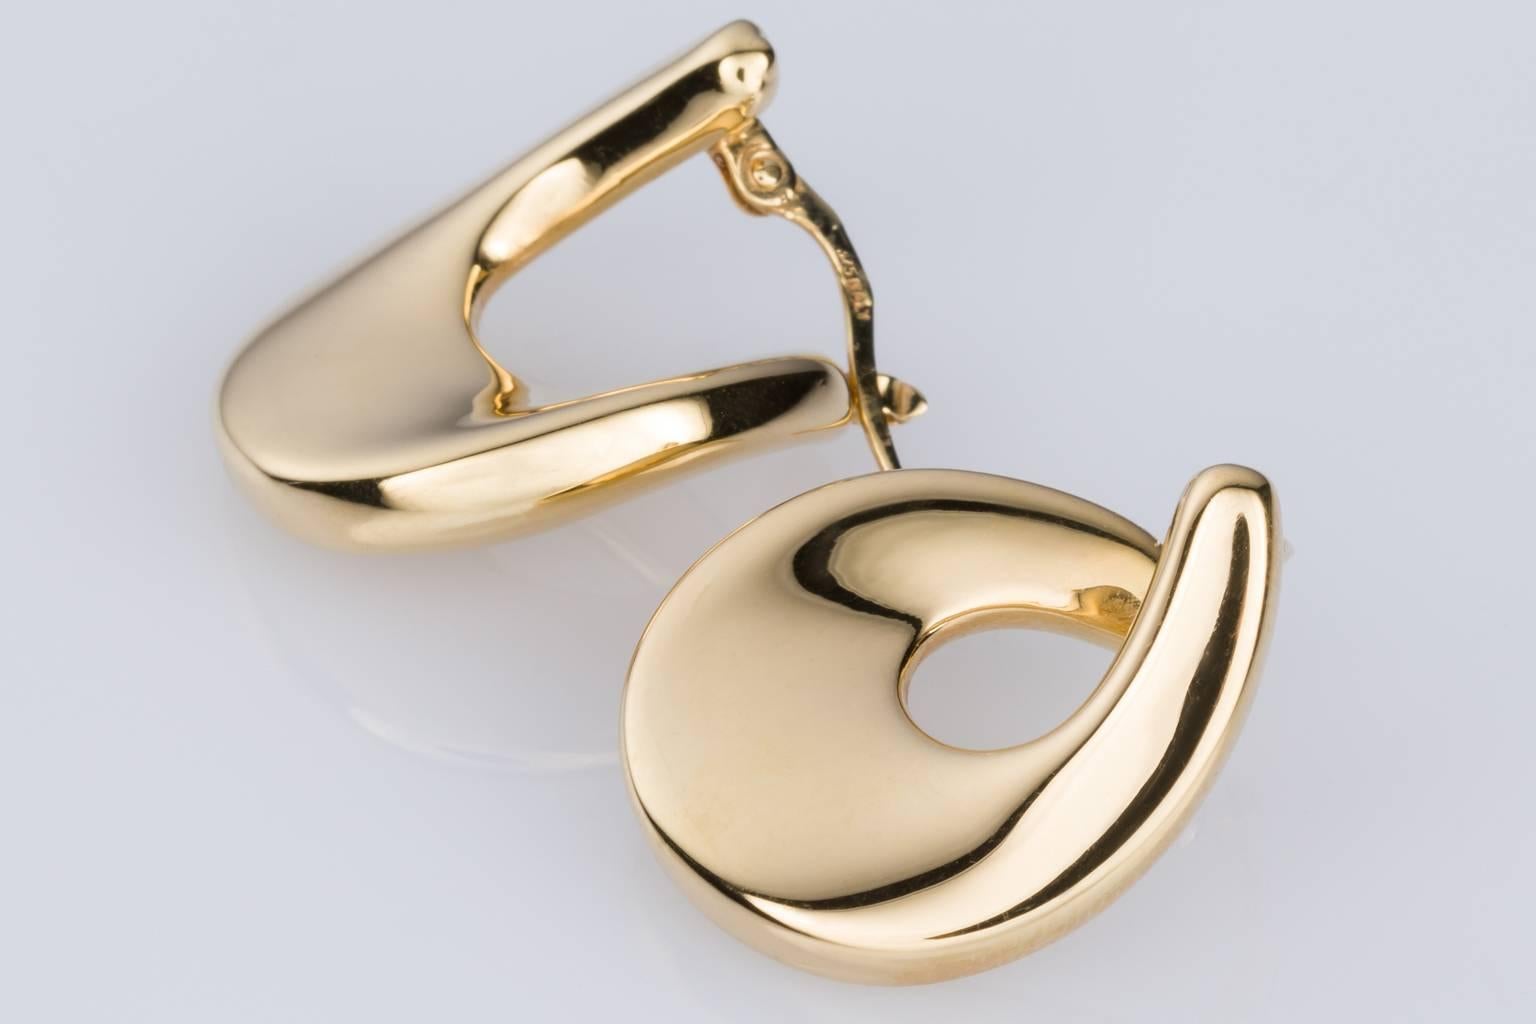 Simple and great for everyday wear, light and easy on the ears. These super earrings are fashioned in high polish 9k yellow gold with a swirl design that starts at the front of the earlobe and swings around to the back. They are a great look on the